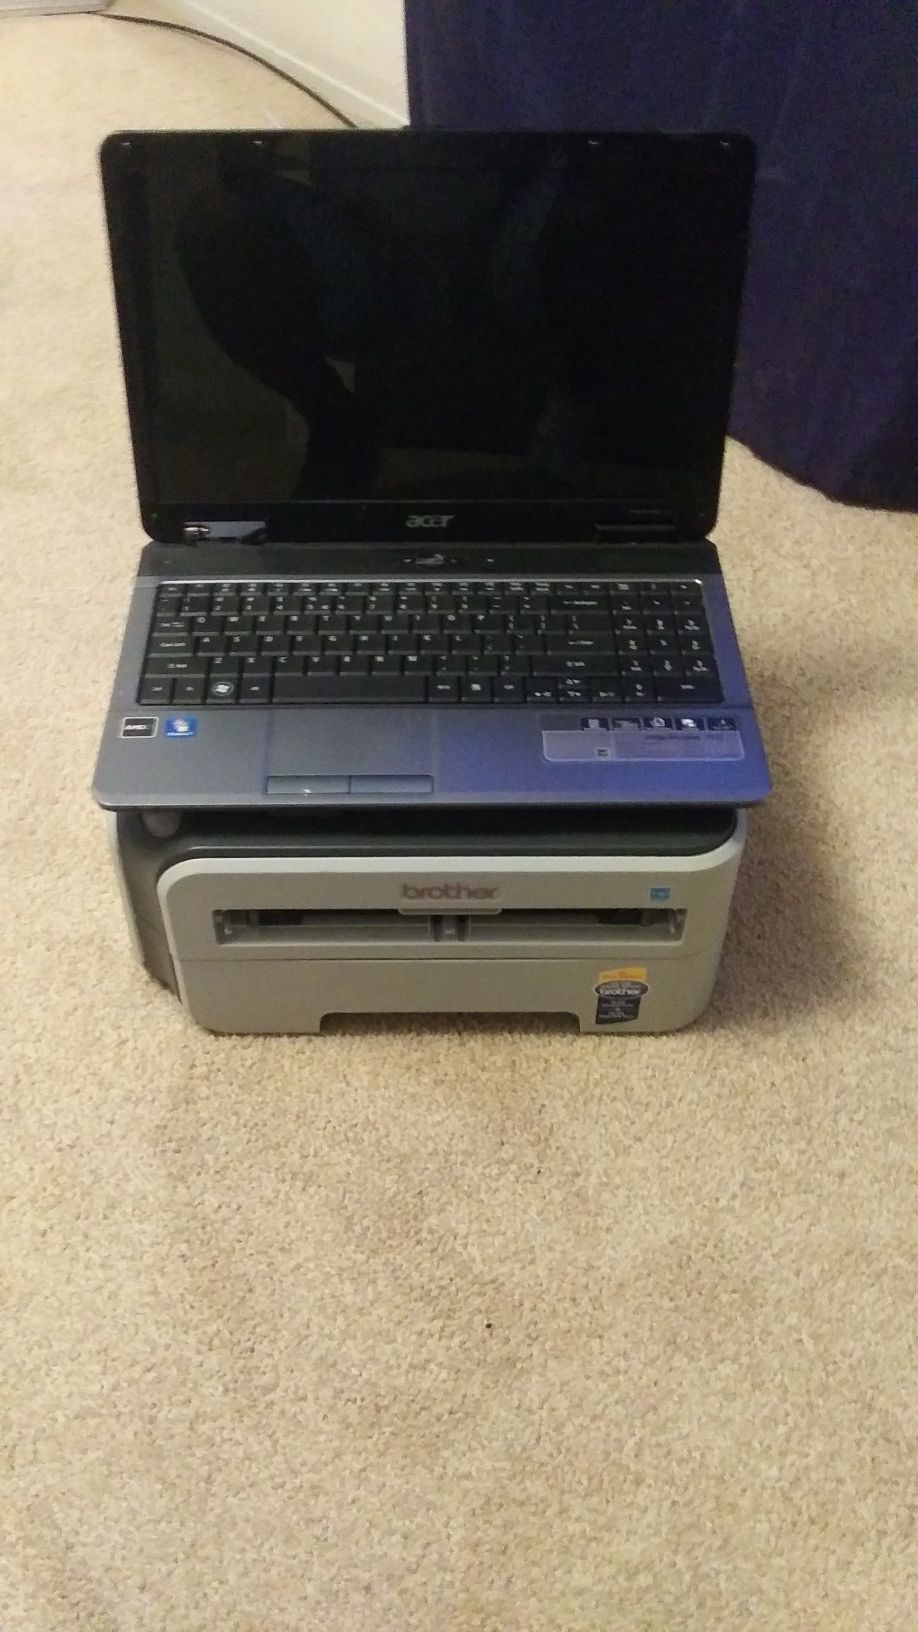 Acer Laptop and Brother printer